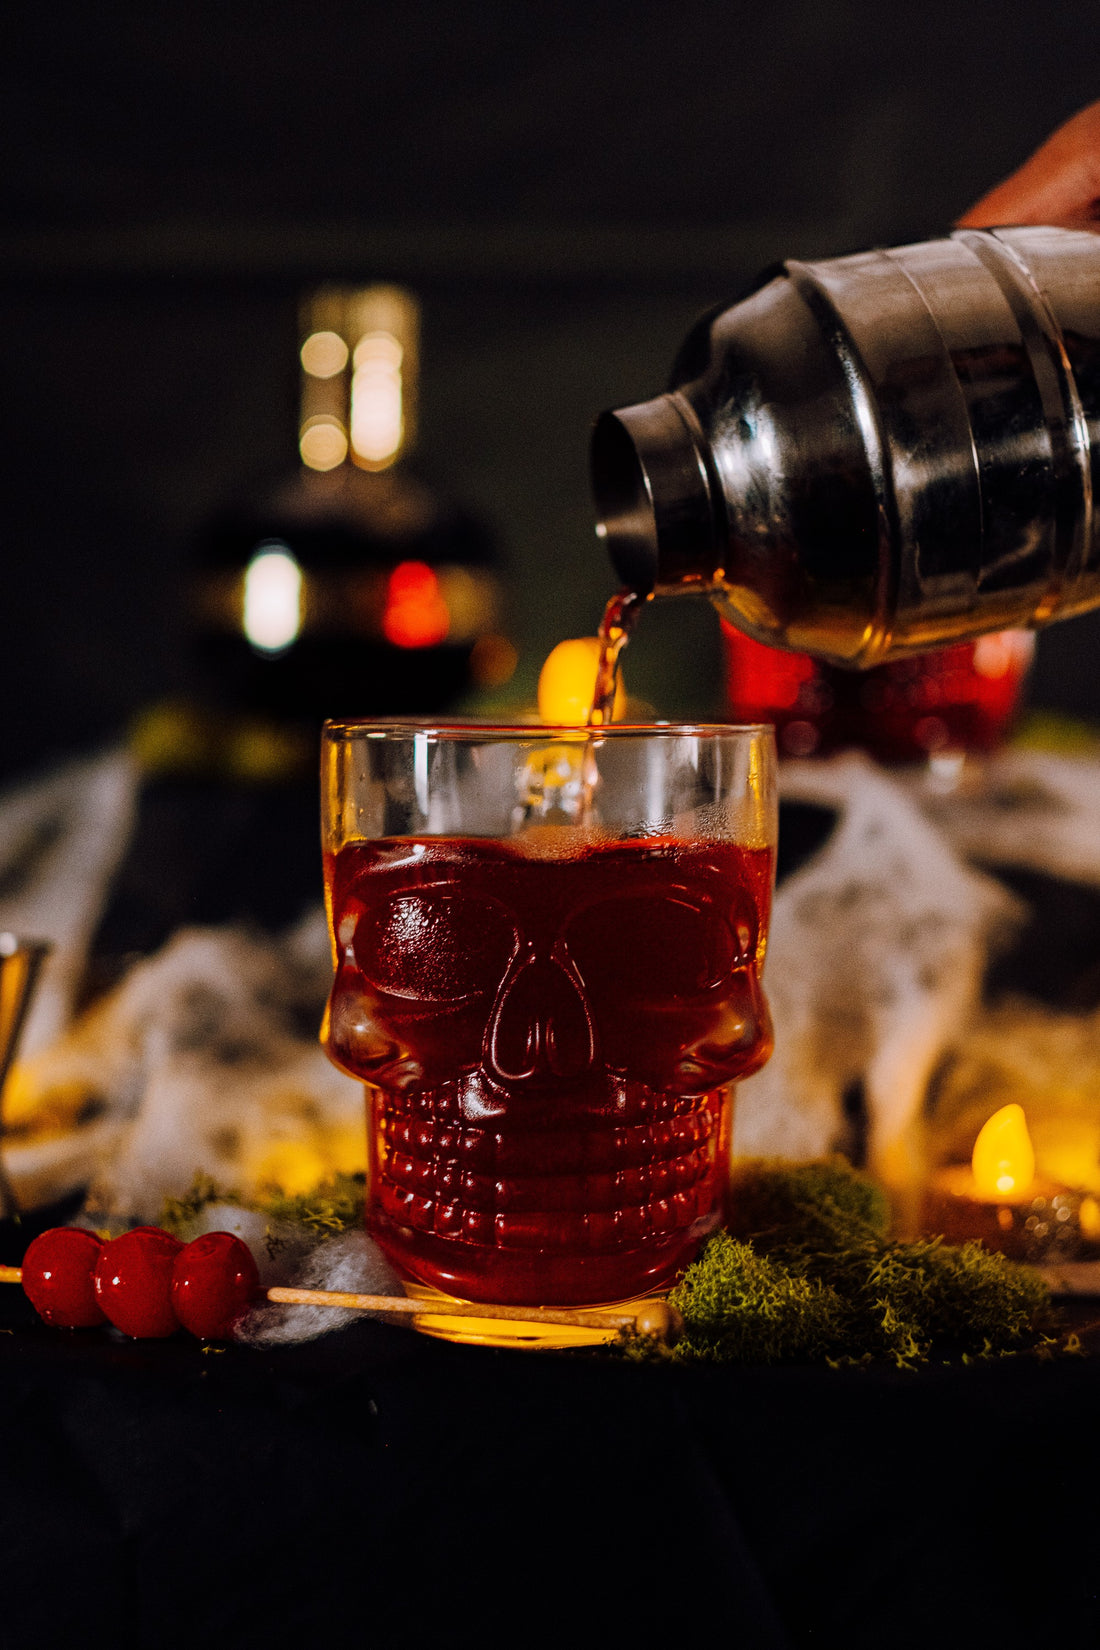 Bourbon cocktail poured into a skull glass. Features dark rich red colour and maraschino cherries.